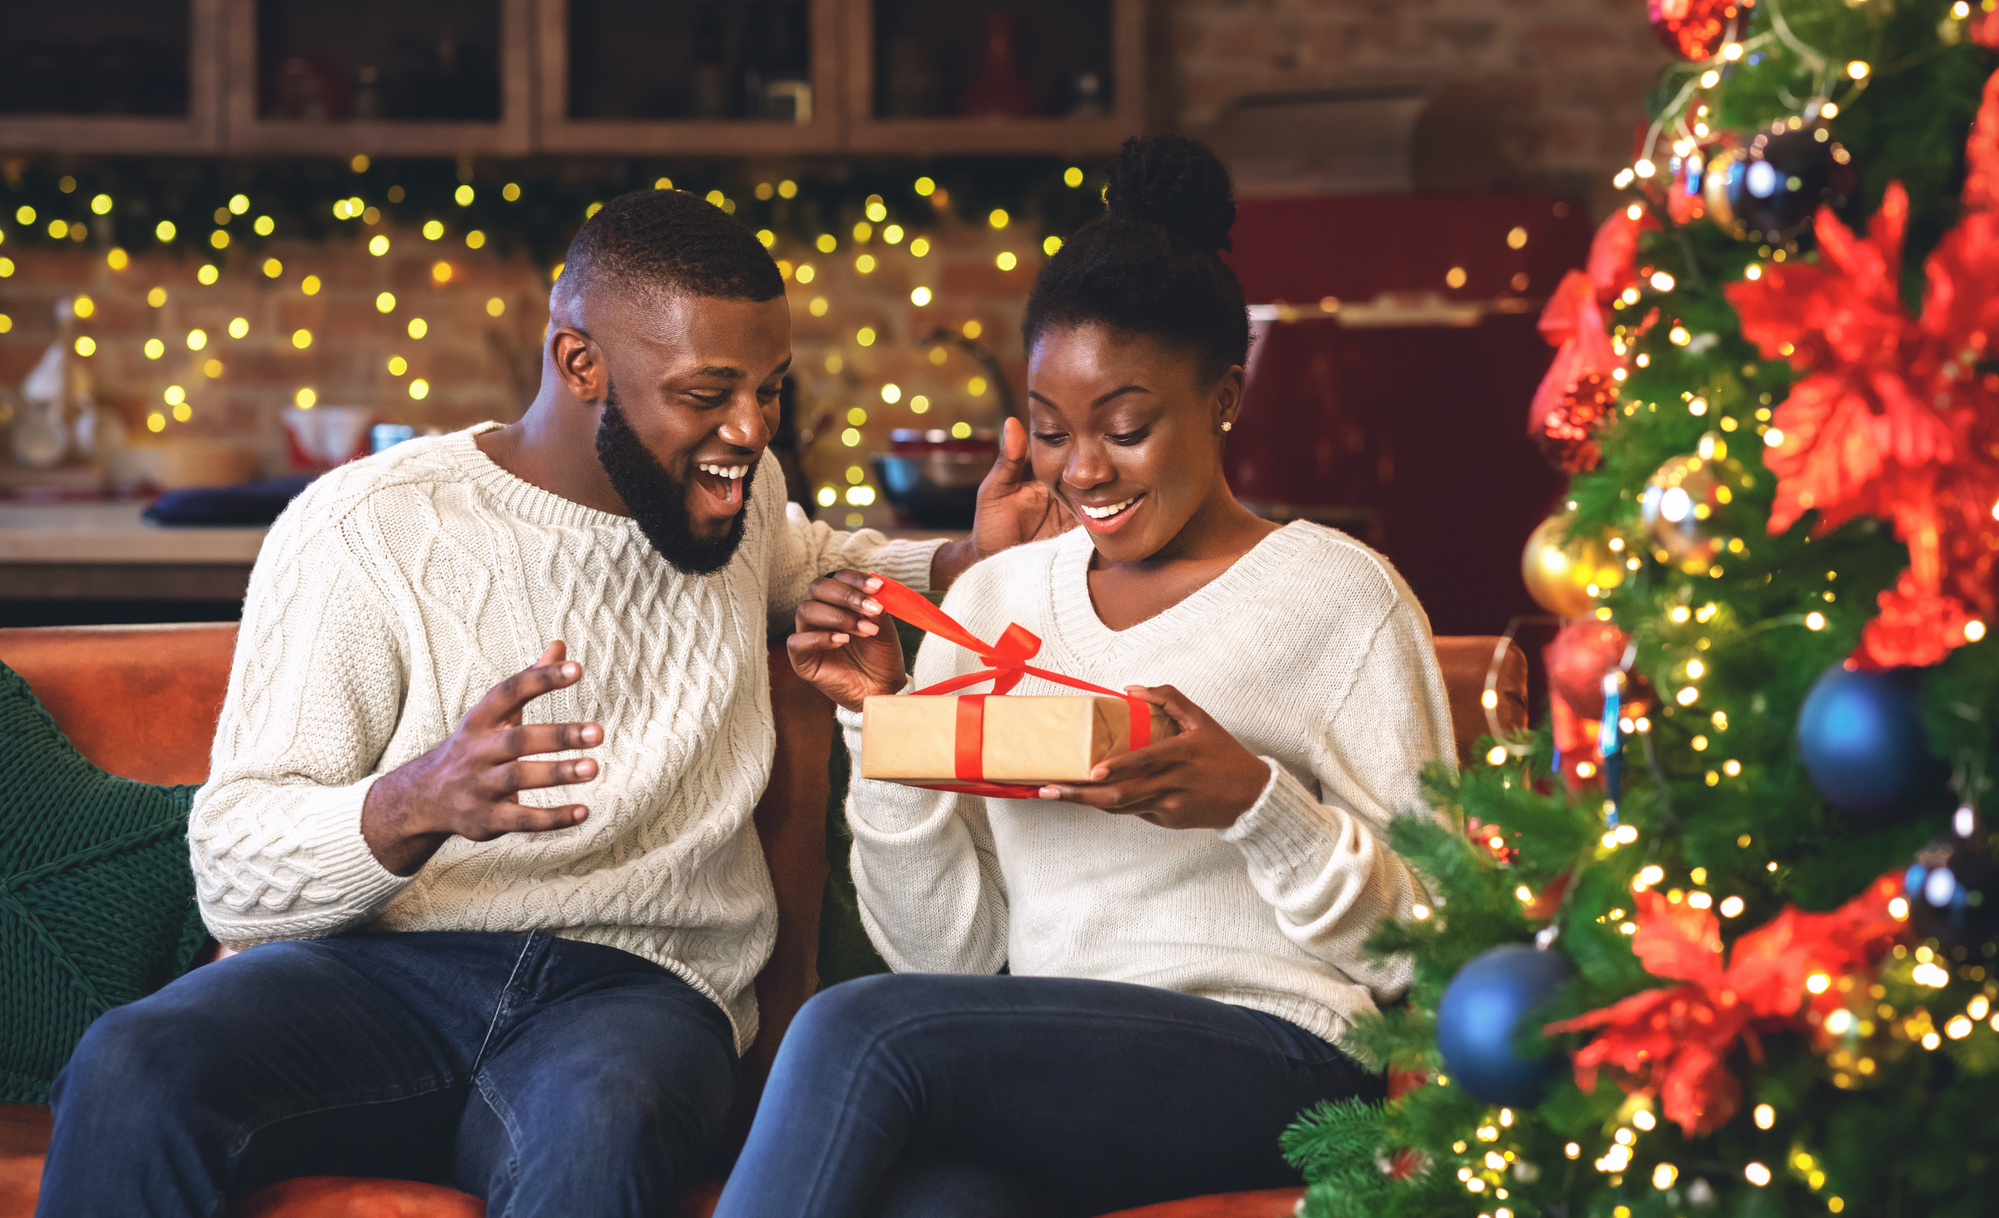 When Should You Start Buying Christmas Gifts? Early or Later?